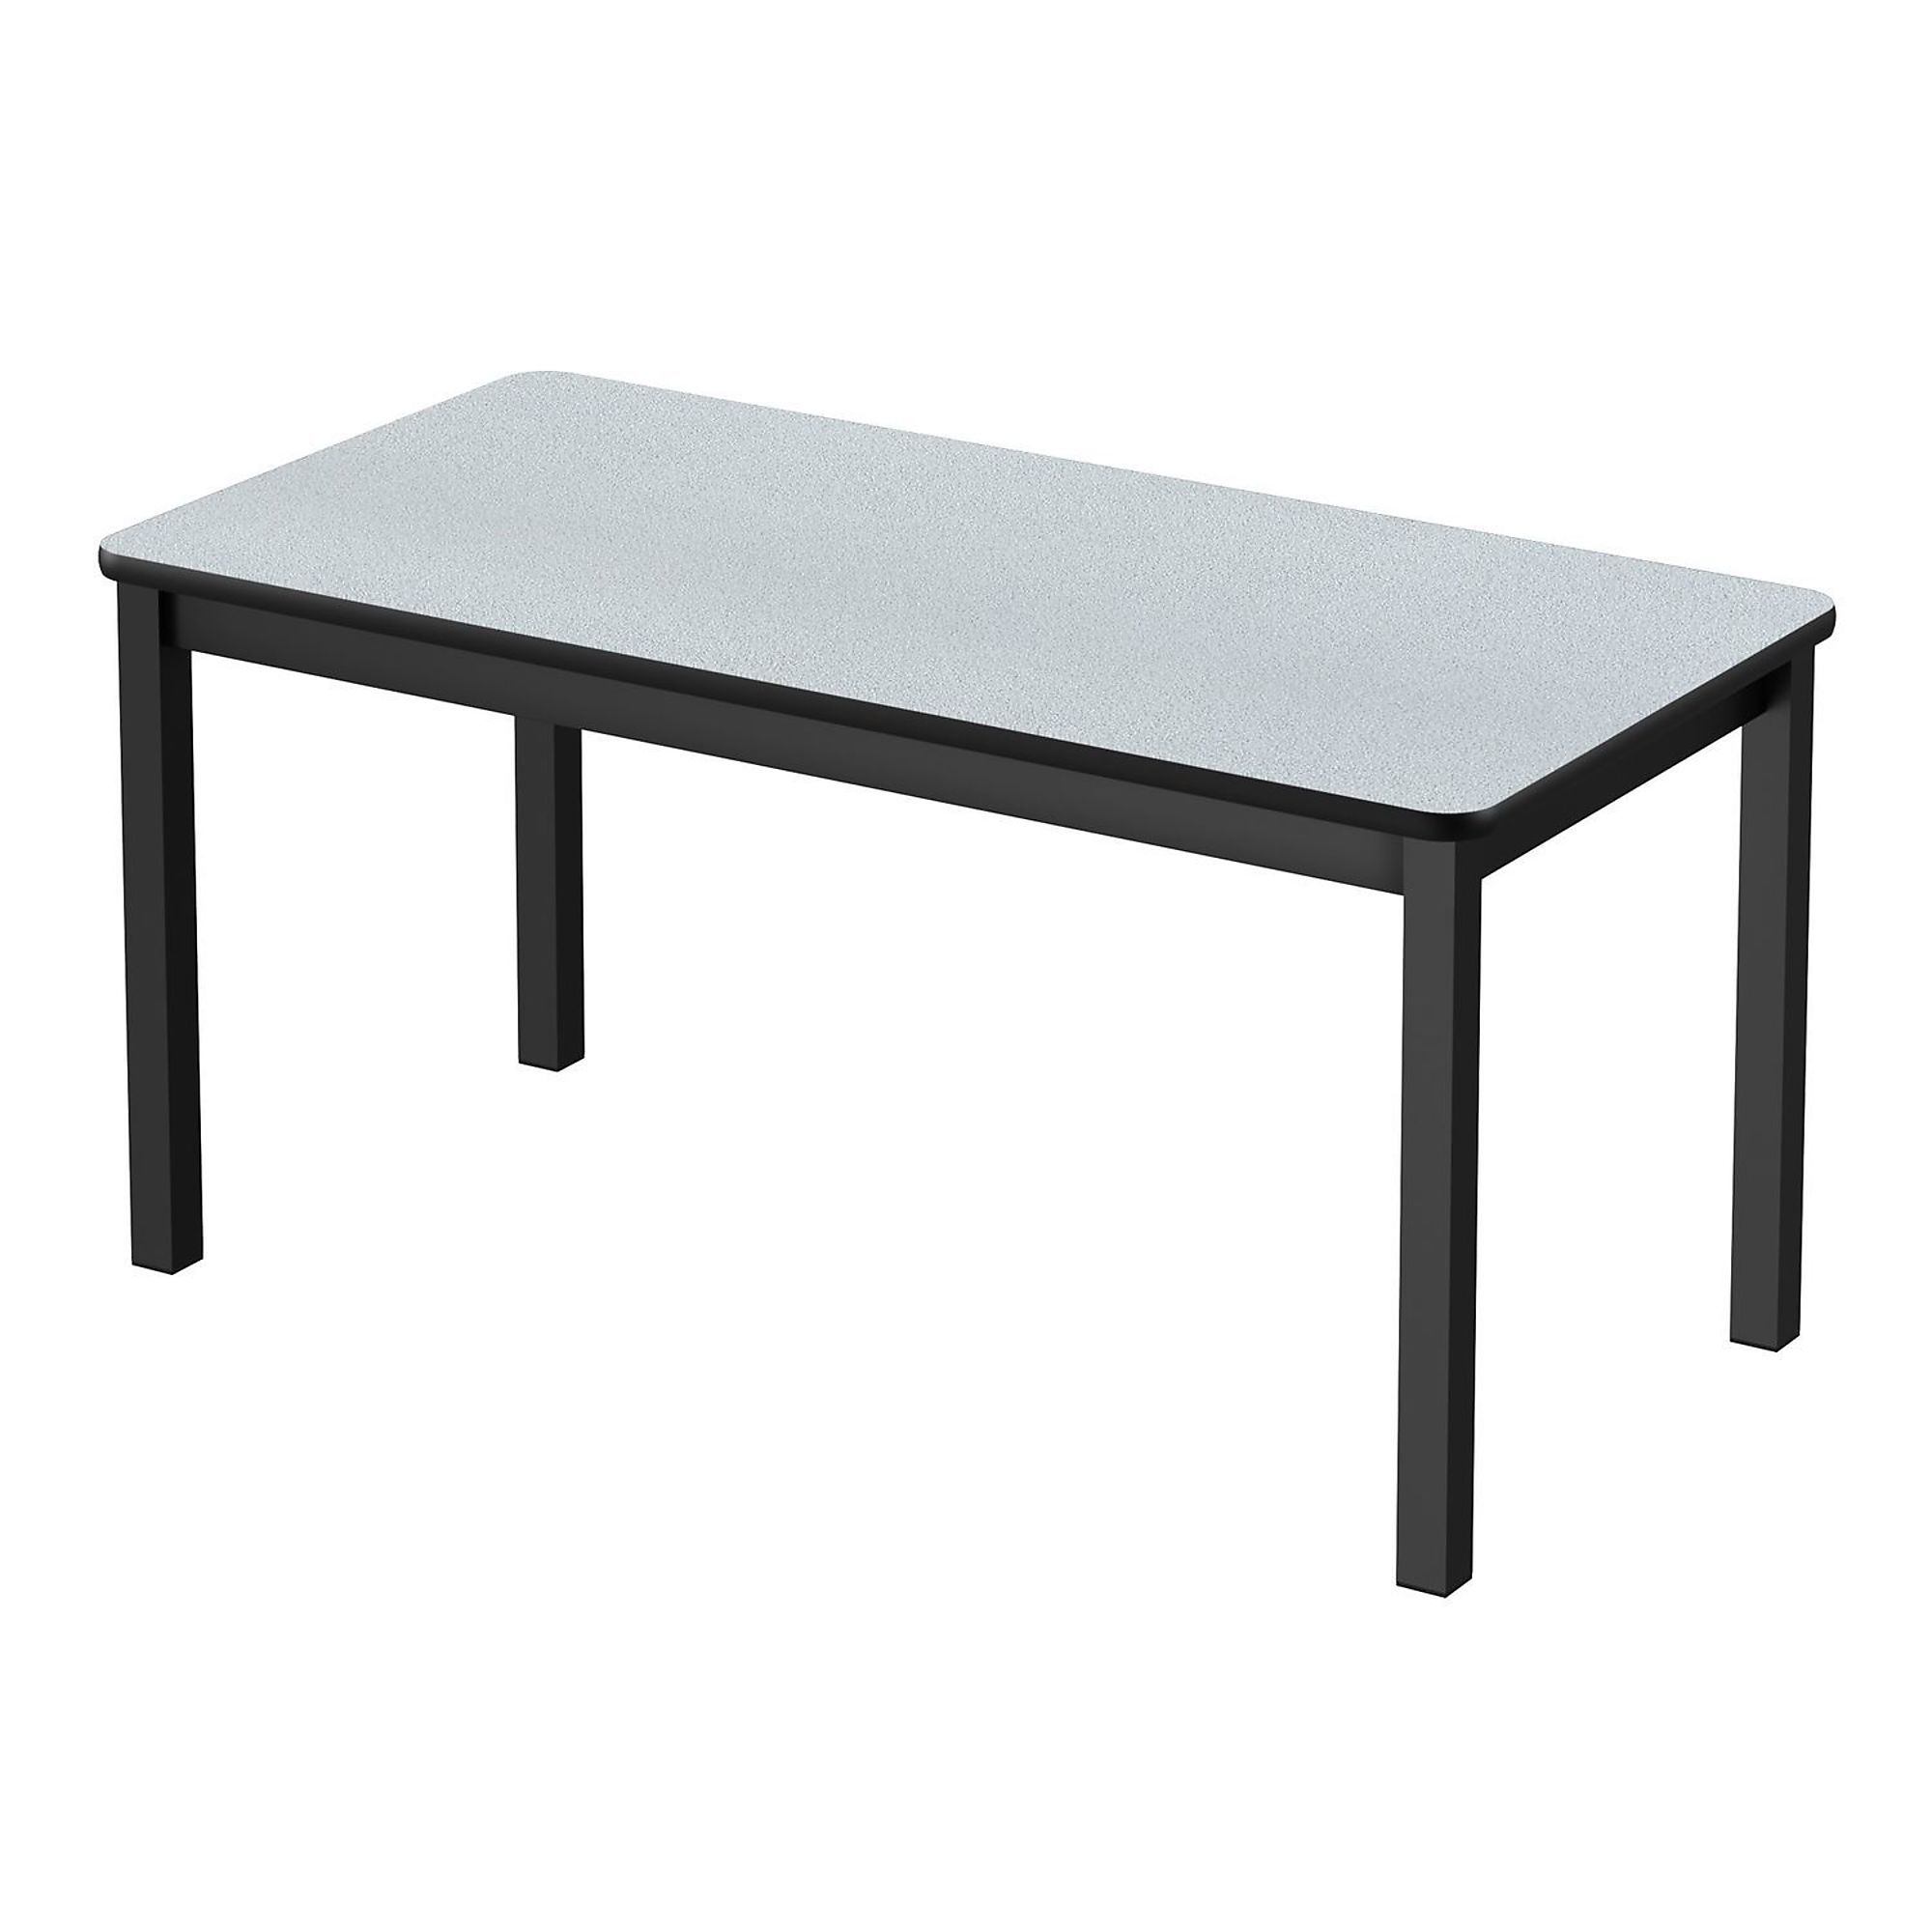 Correll, TFL Library Table, Gray Granite, 36x72 Height 29 in, Width 36 in, Length 72 in, Model LR3672TF-15